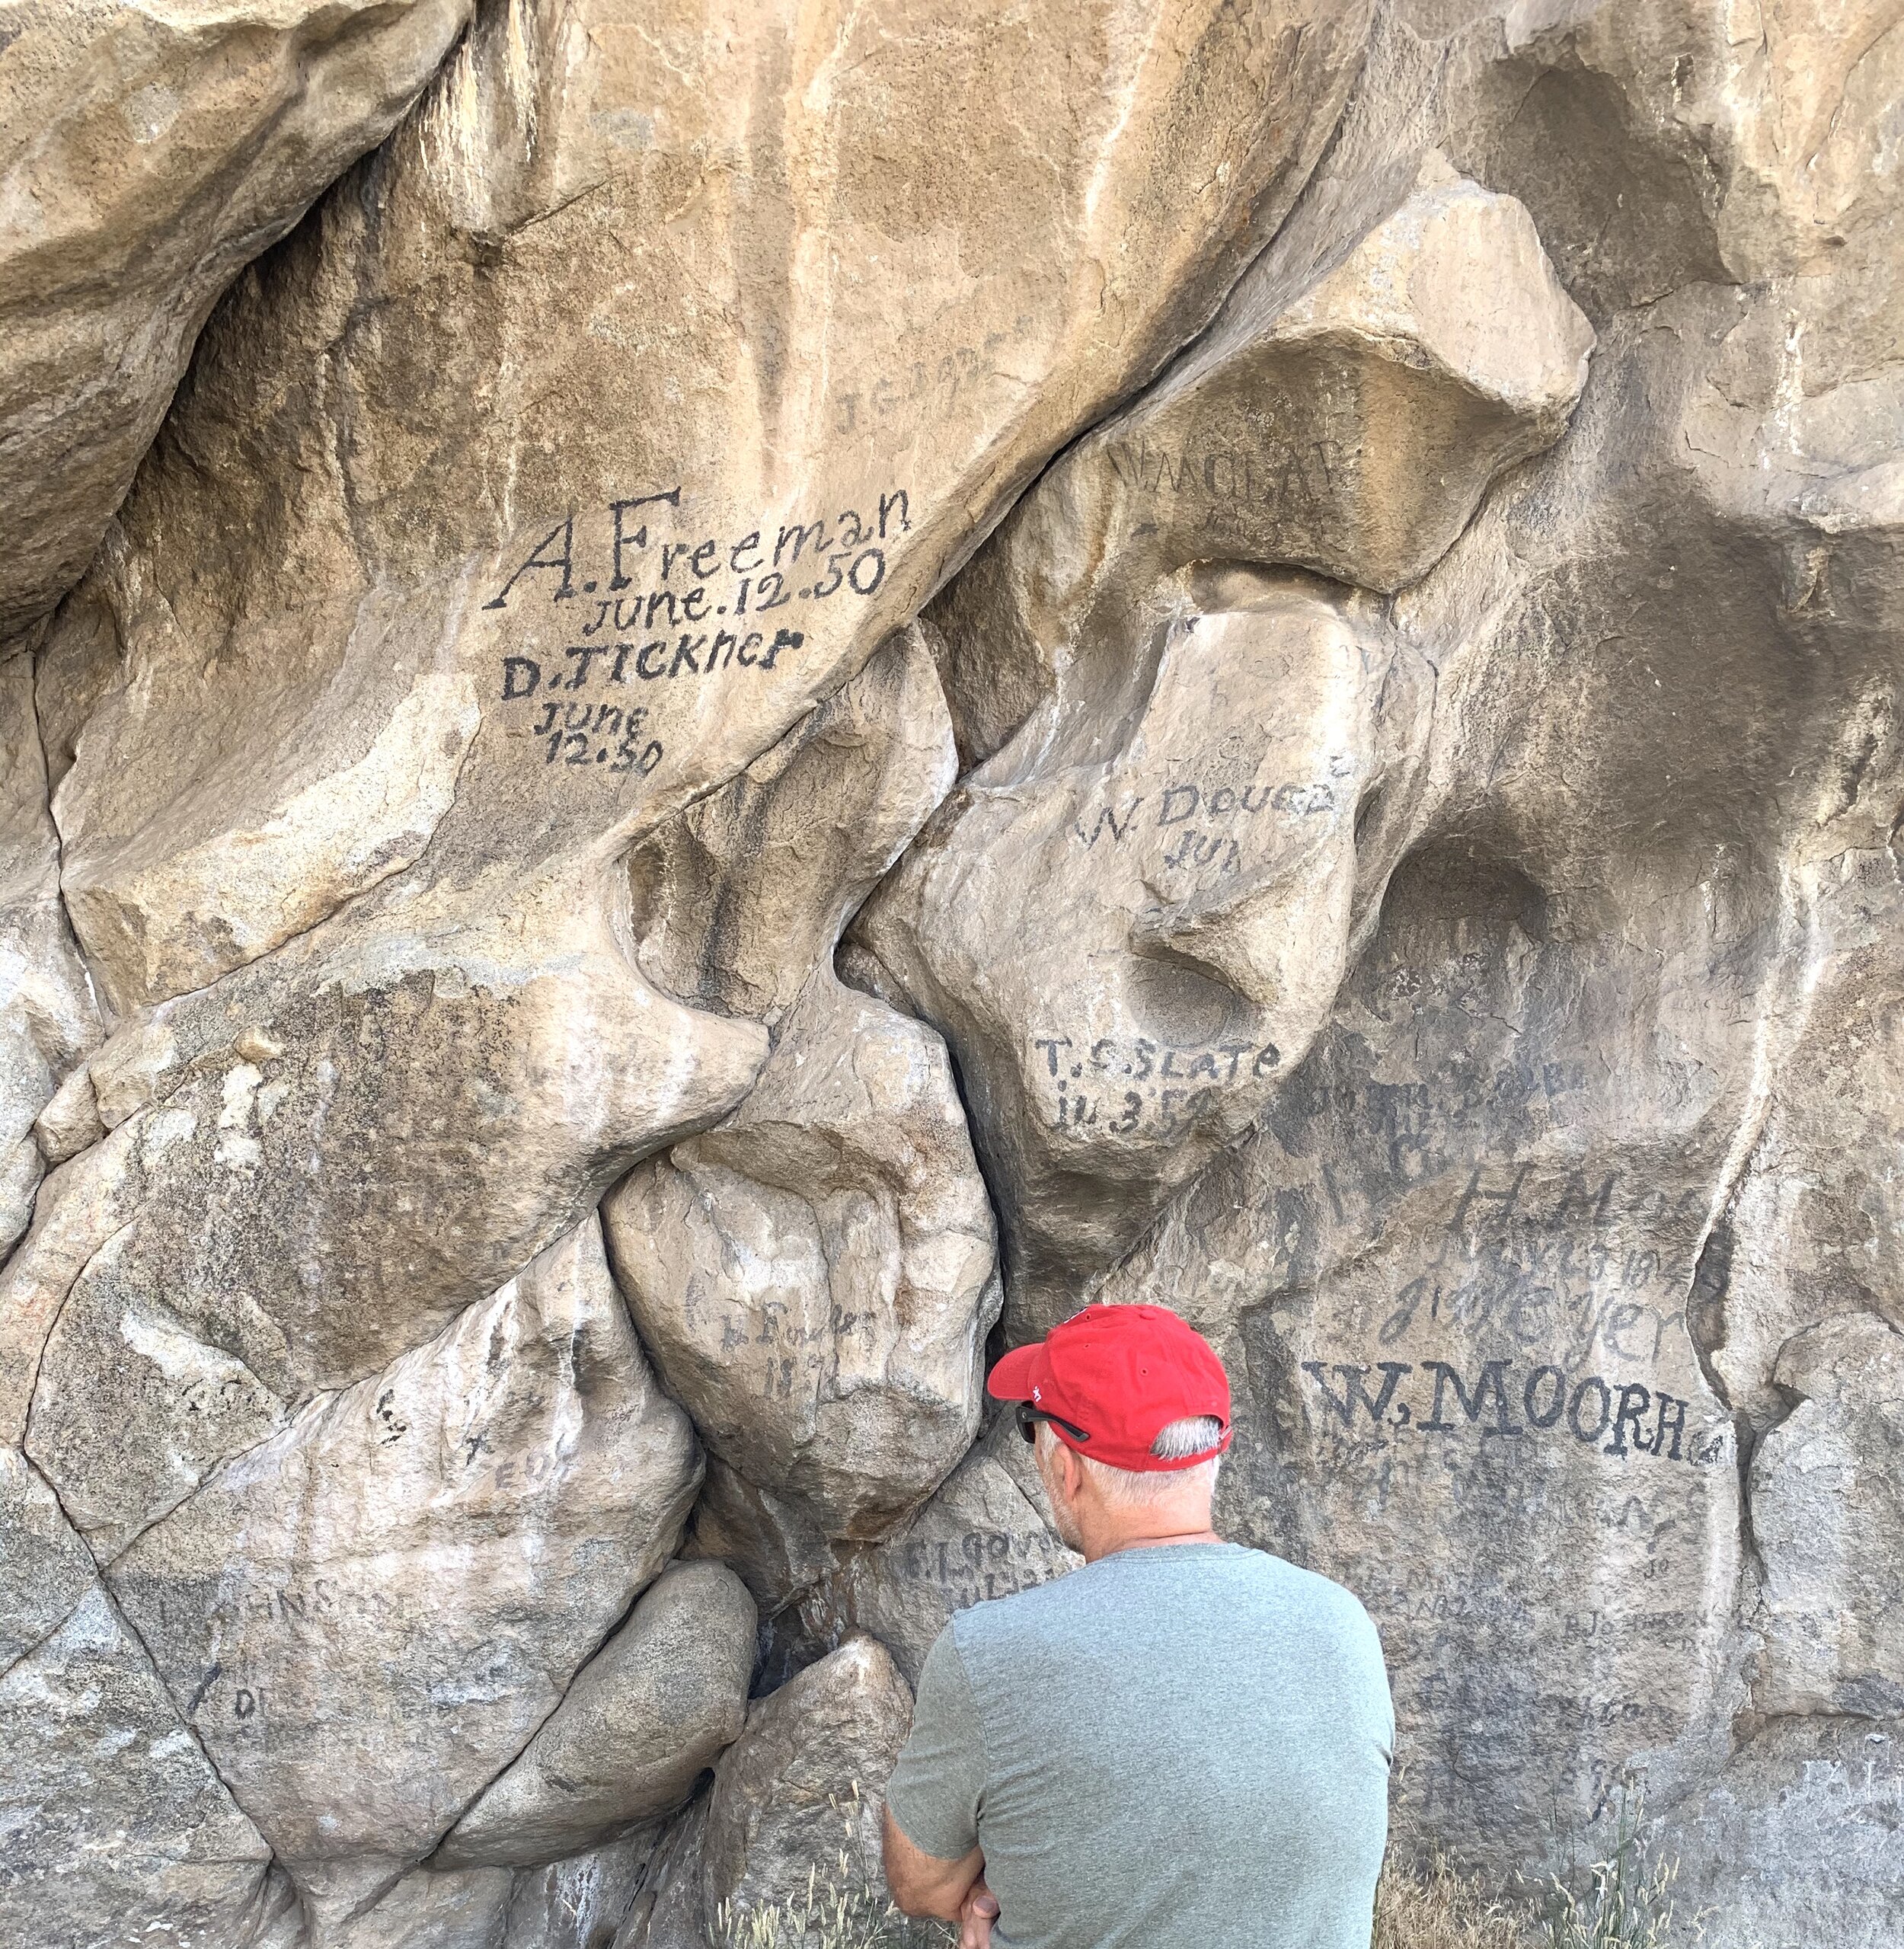  As thousands of pioneers traveled back and forth along the  California Trail,  they would "check-in" on some of the rocks. By signing their names and the date of their travels, they would commemorate their endeavor and let others know where they wer